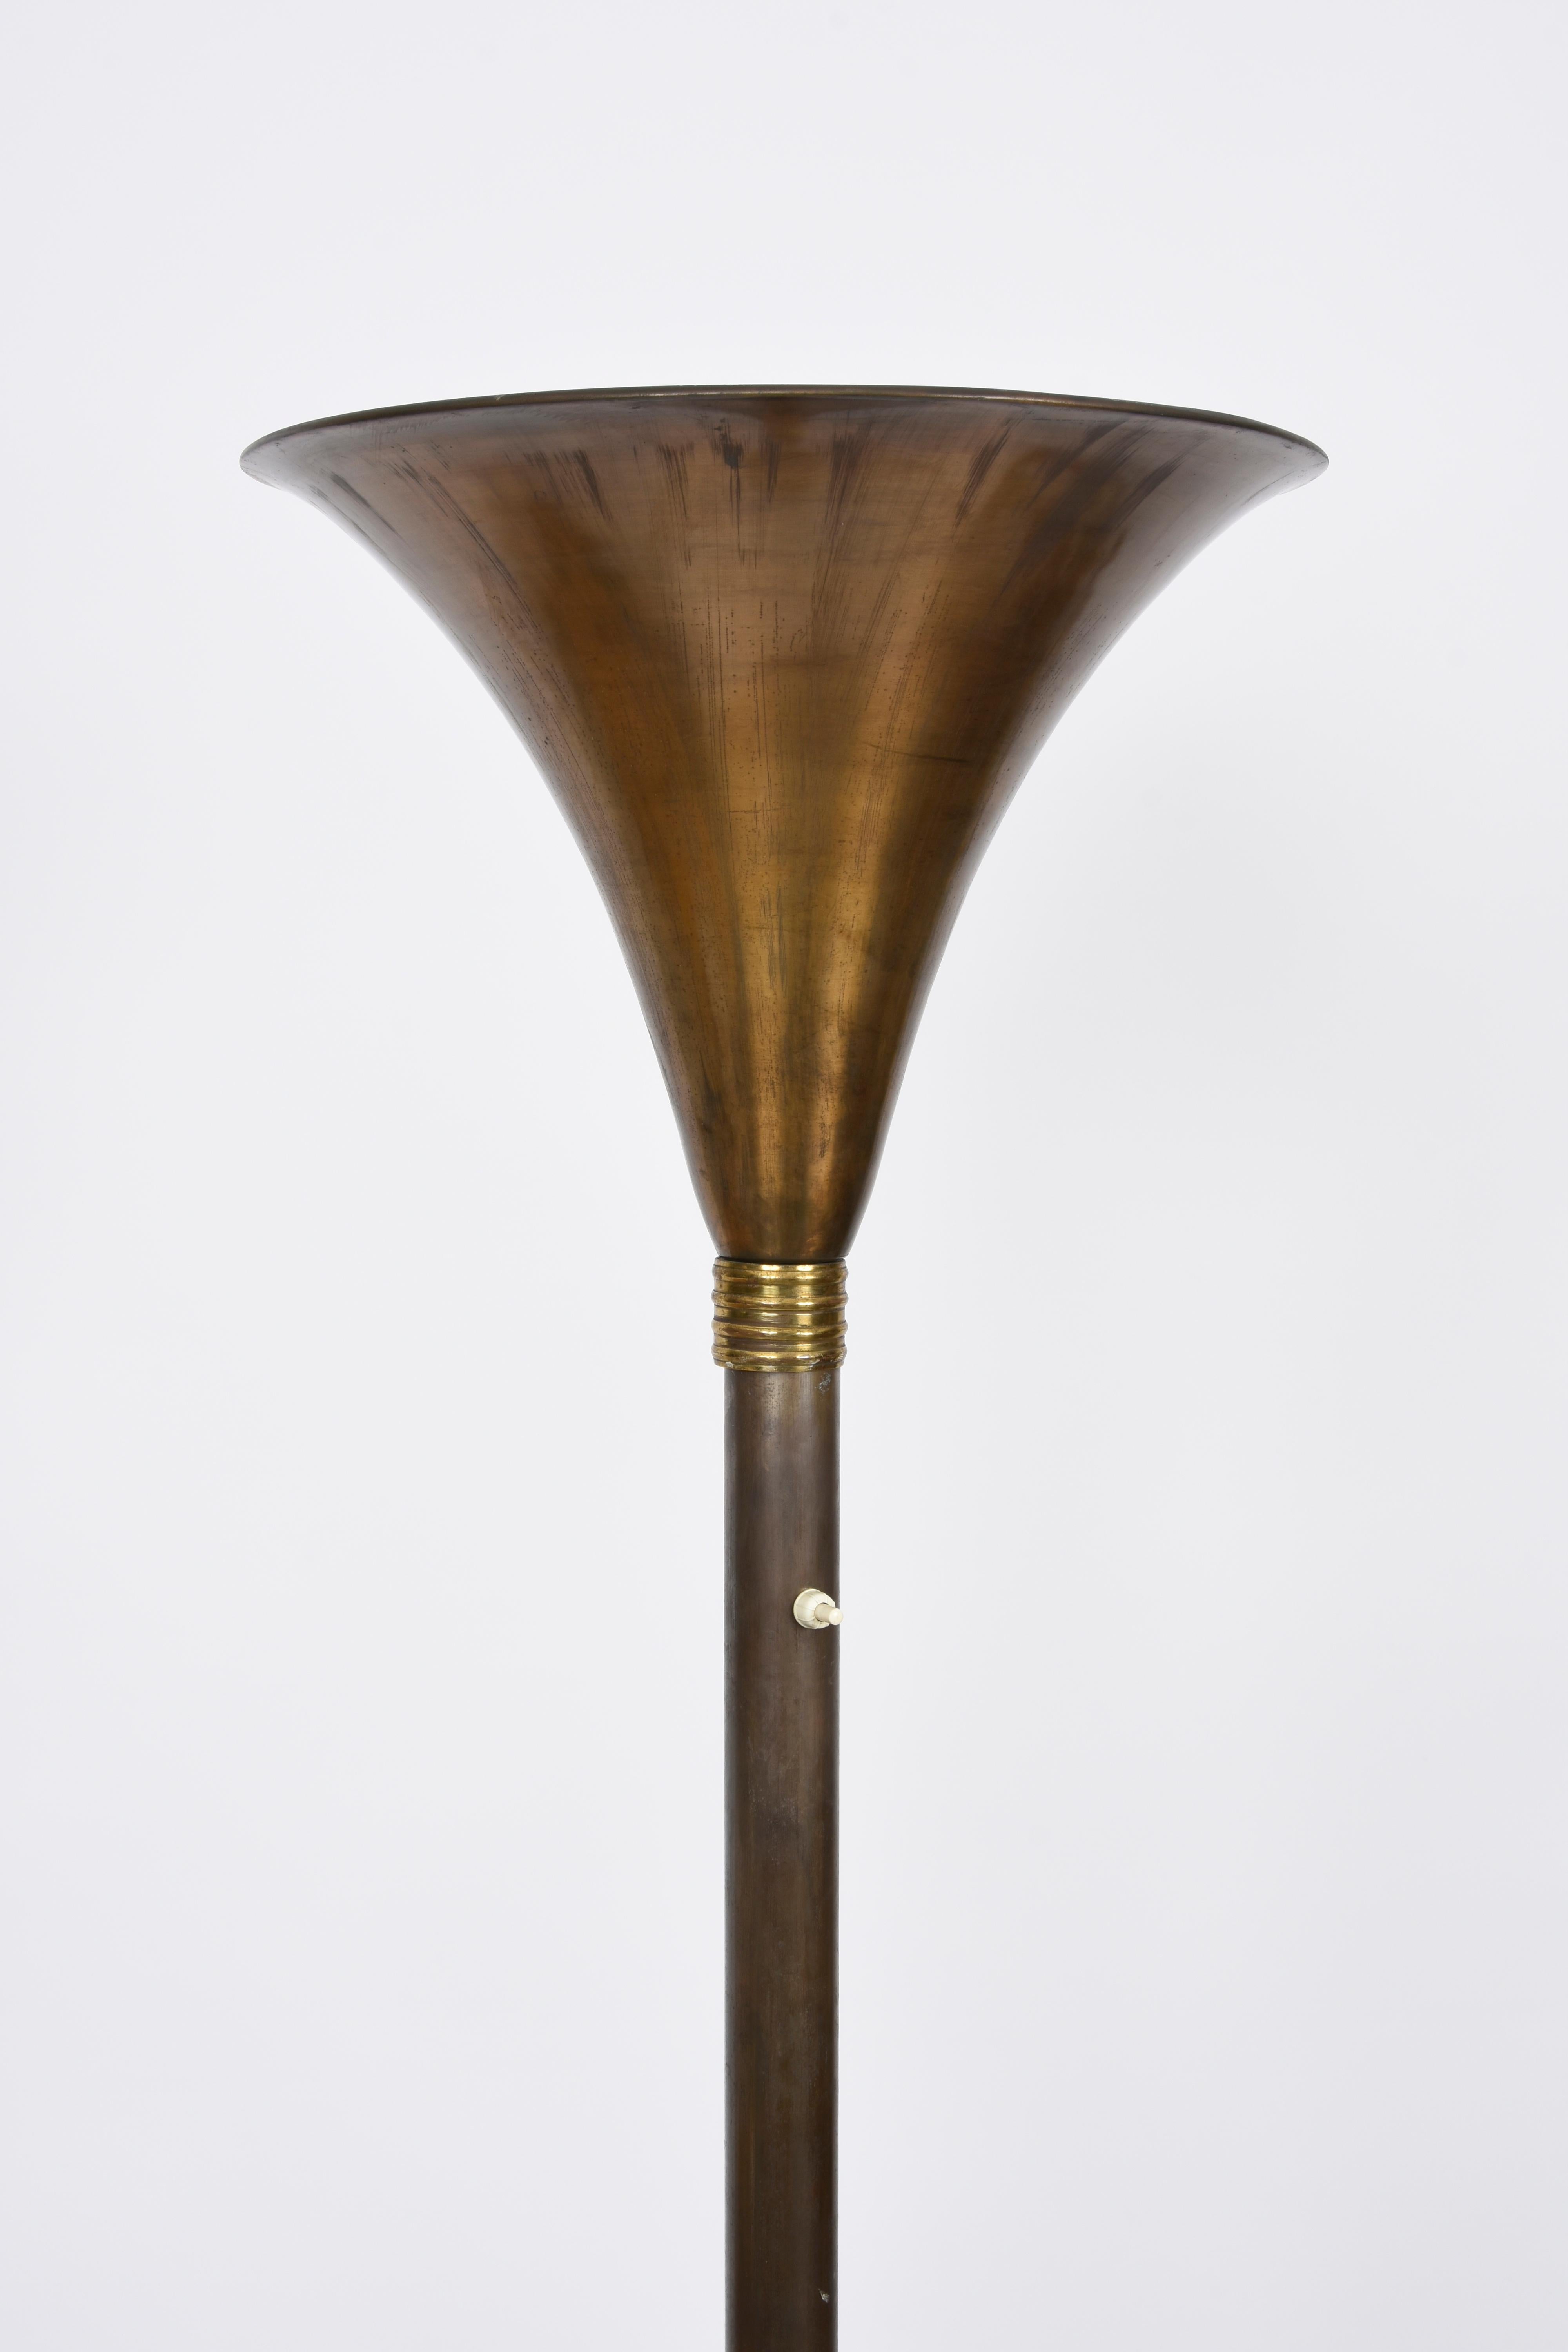 Art Deco Bronzed Metal and Brass Italian Floor Lamp after Pietro Chiesa, 1940s For Sale 1